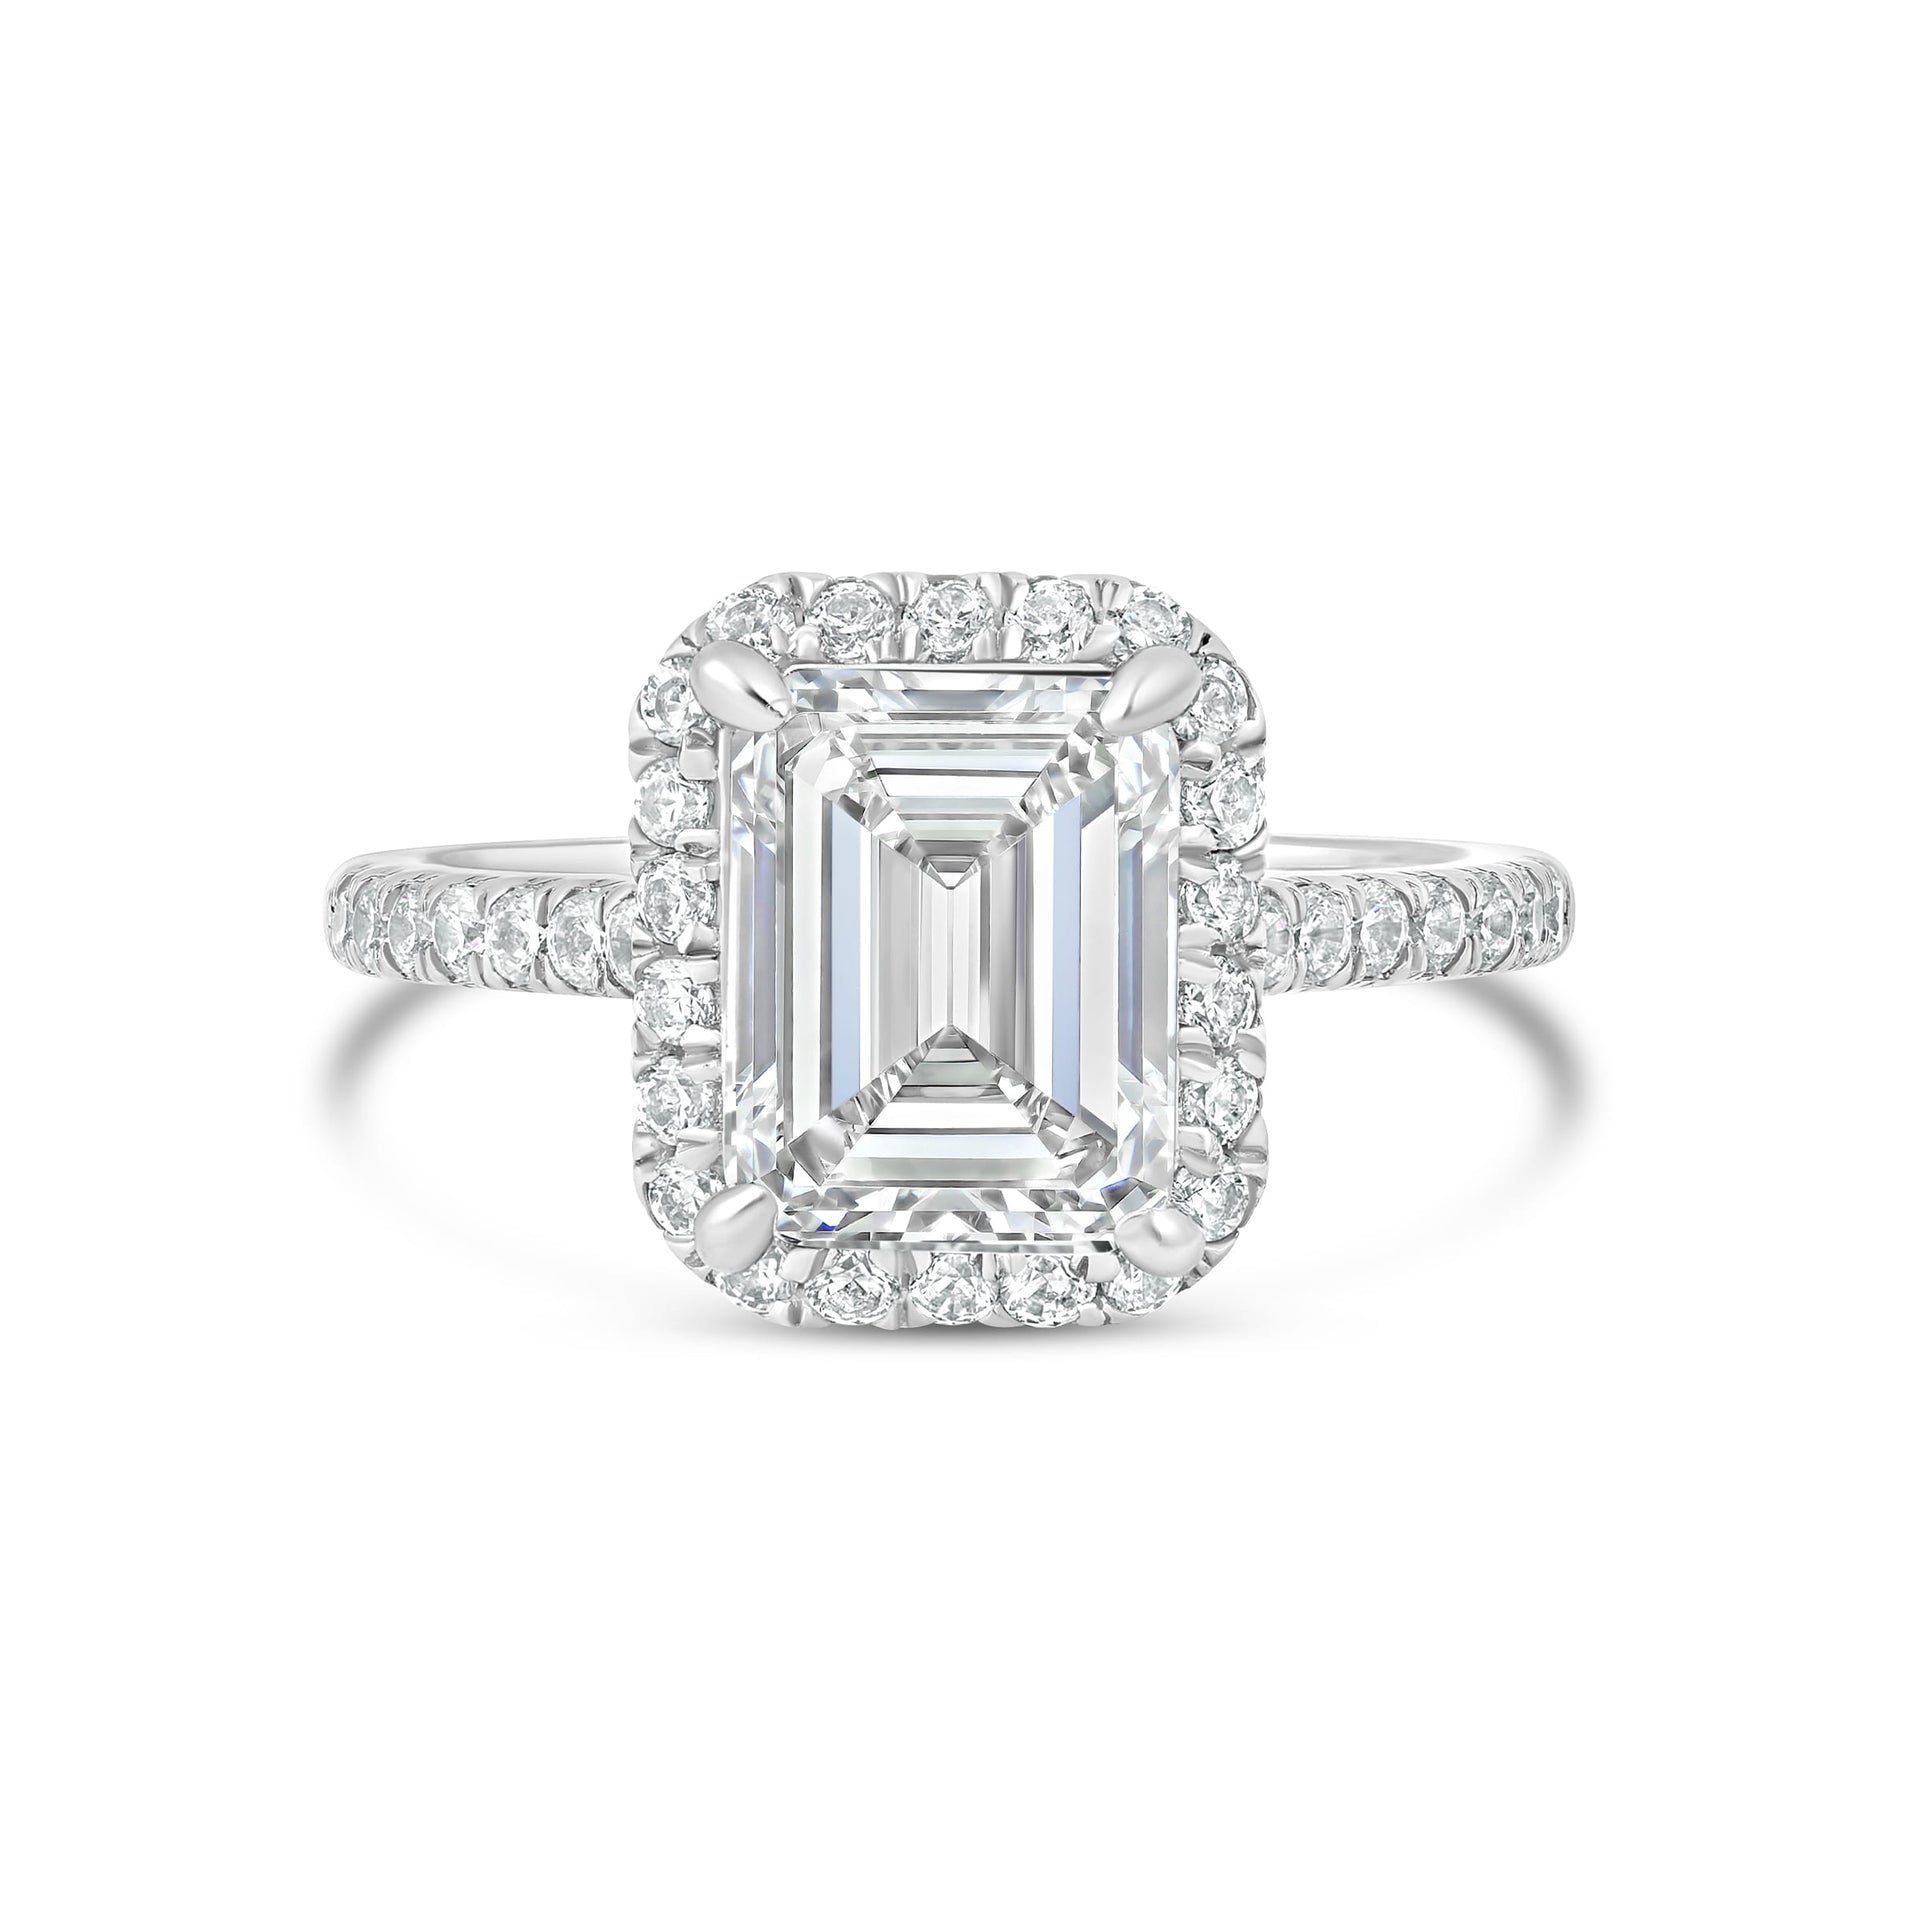 Silver 3 carat emerald cut engagement ring with half eternity band detailing